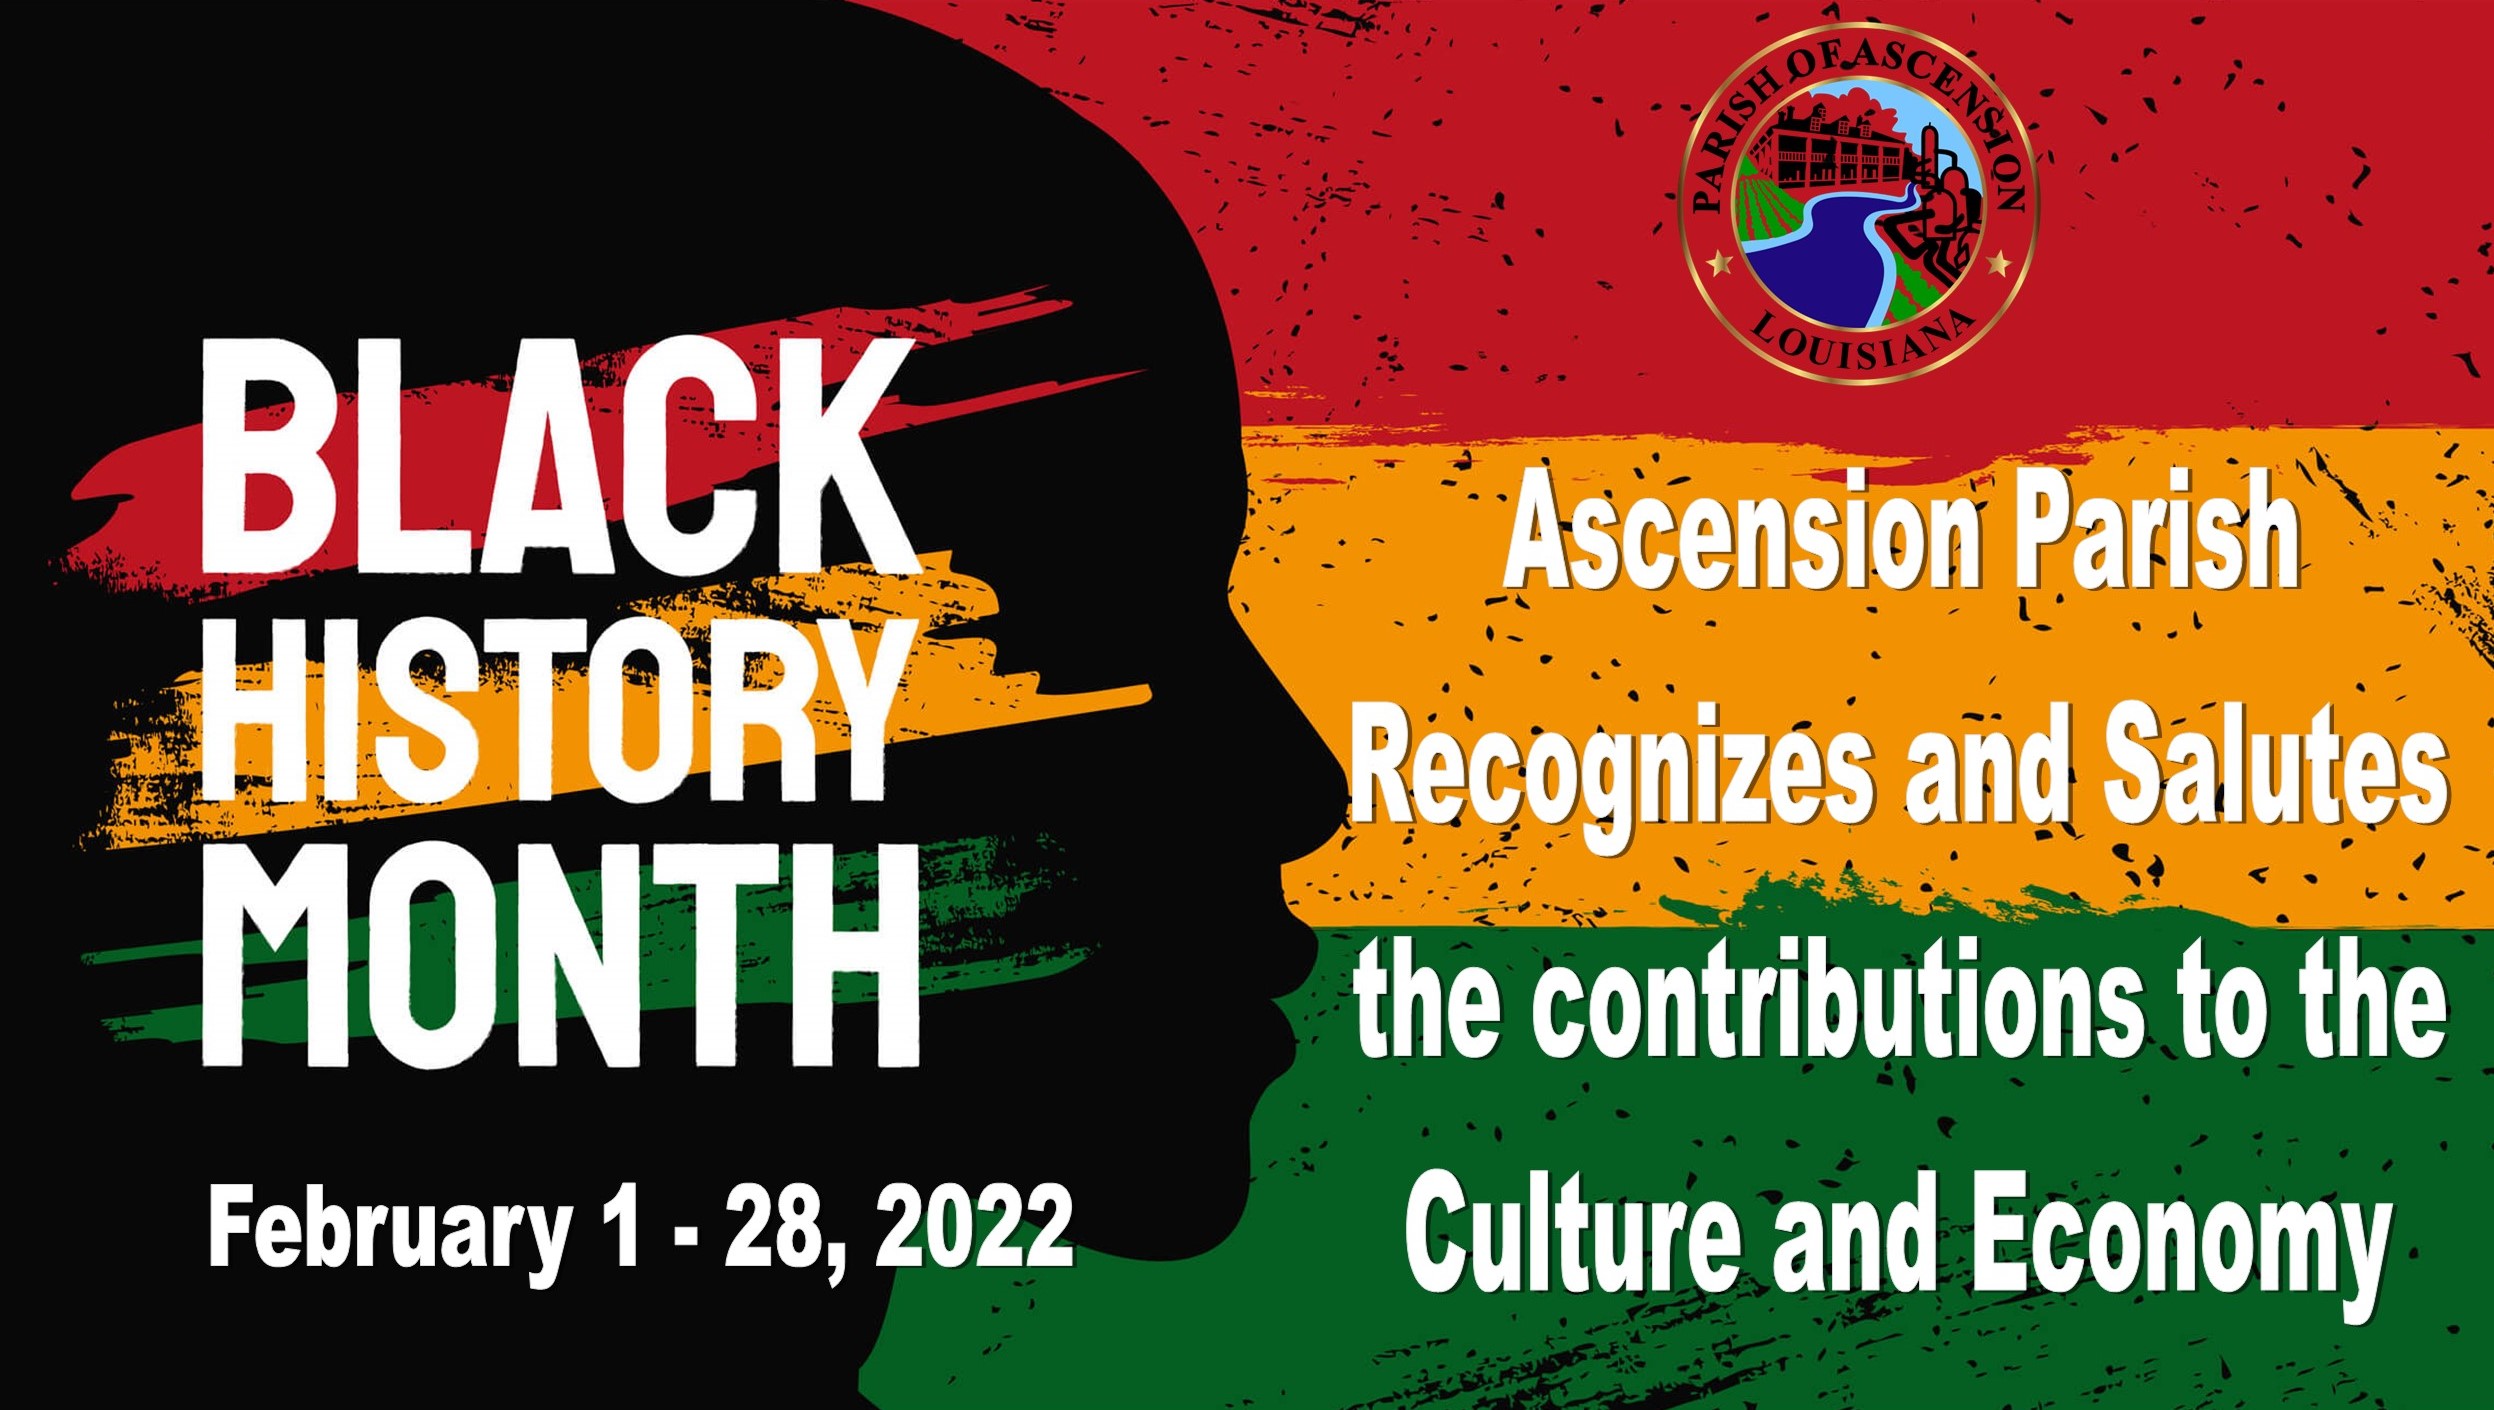 Black History Month Graphic that states Ascension Parish Recognizes and Salutes the contributions to the Culture and Economy